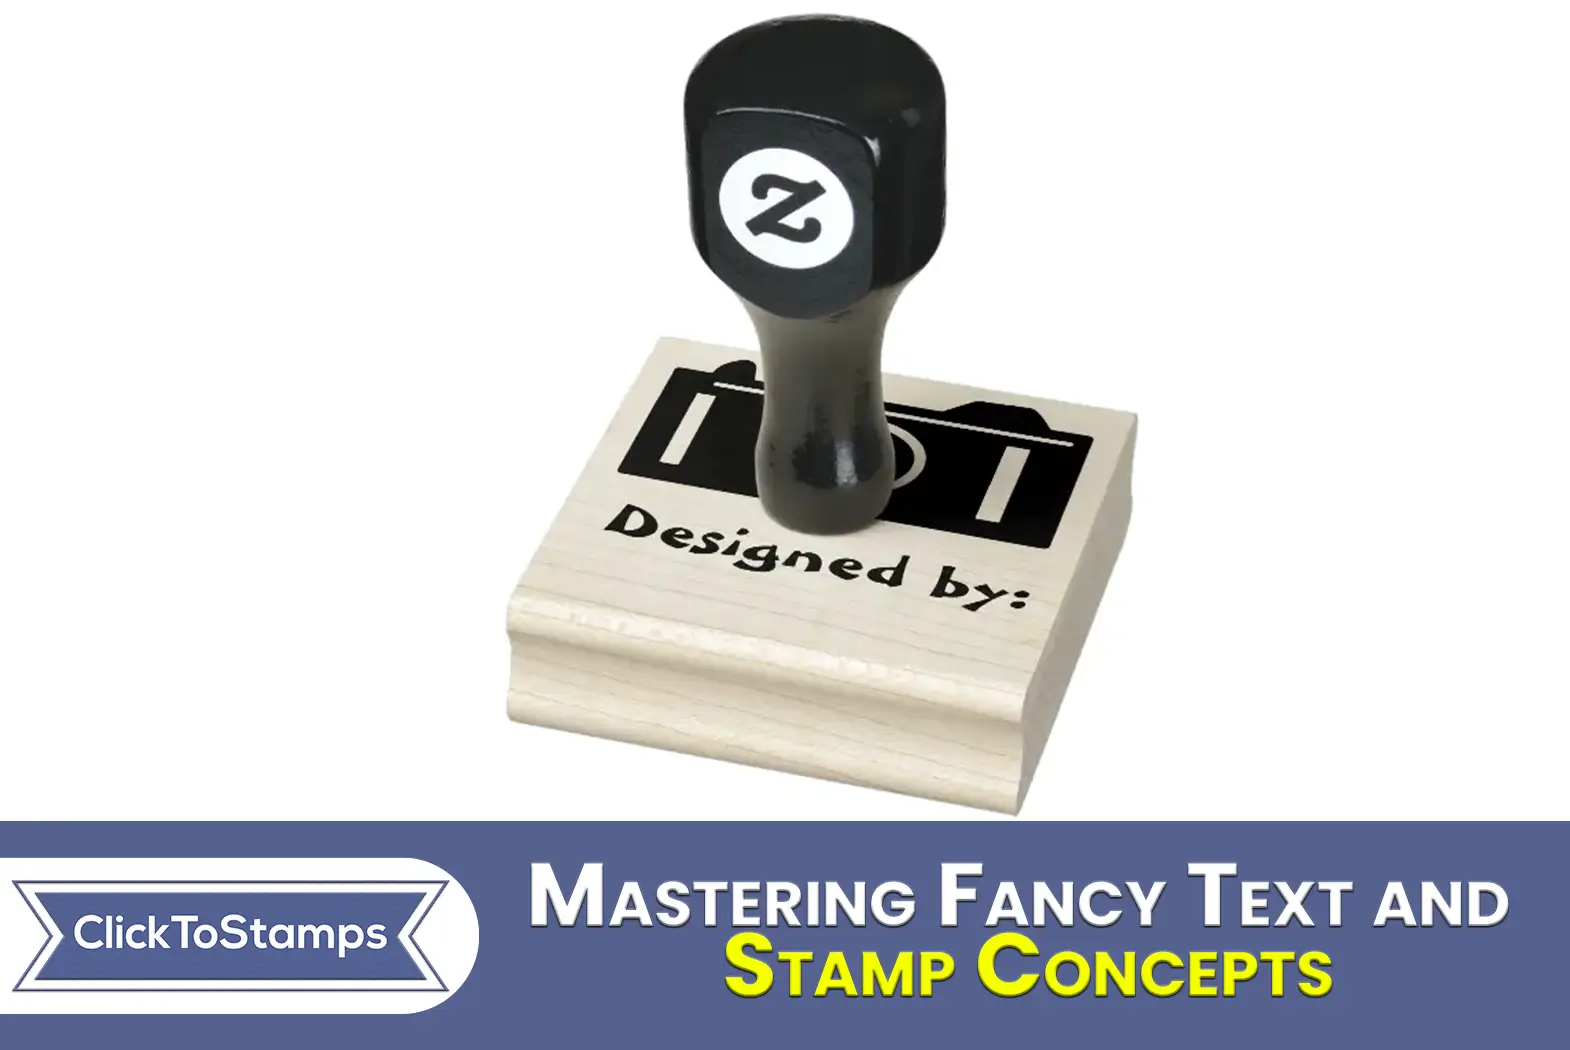 Mastering Fancy Text and Stamp Concepts